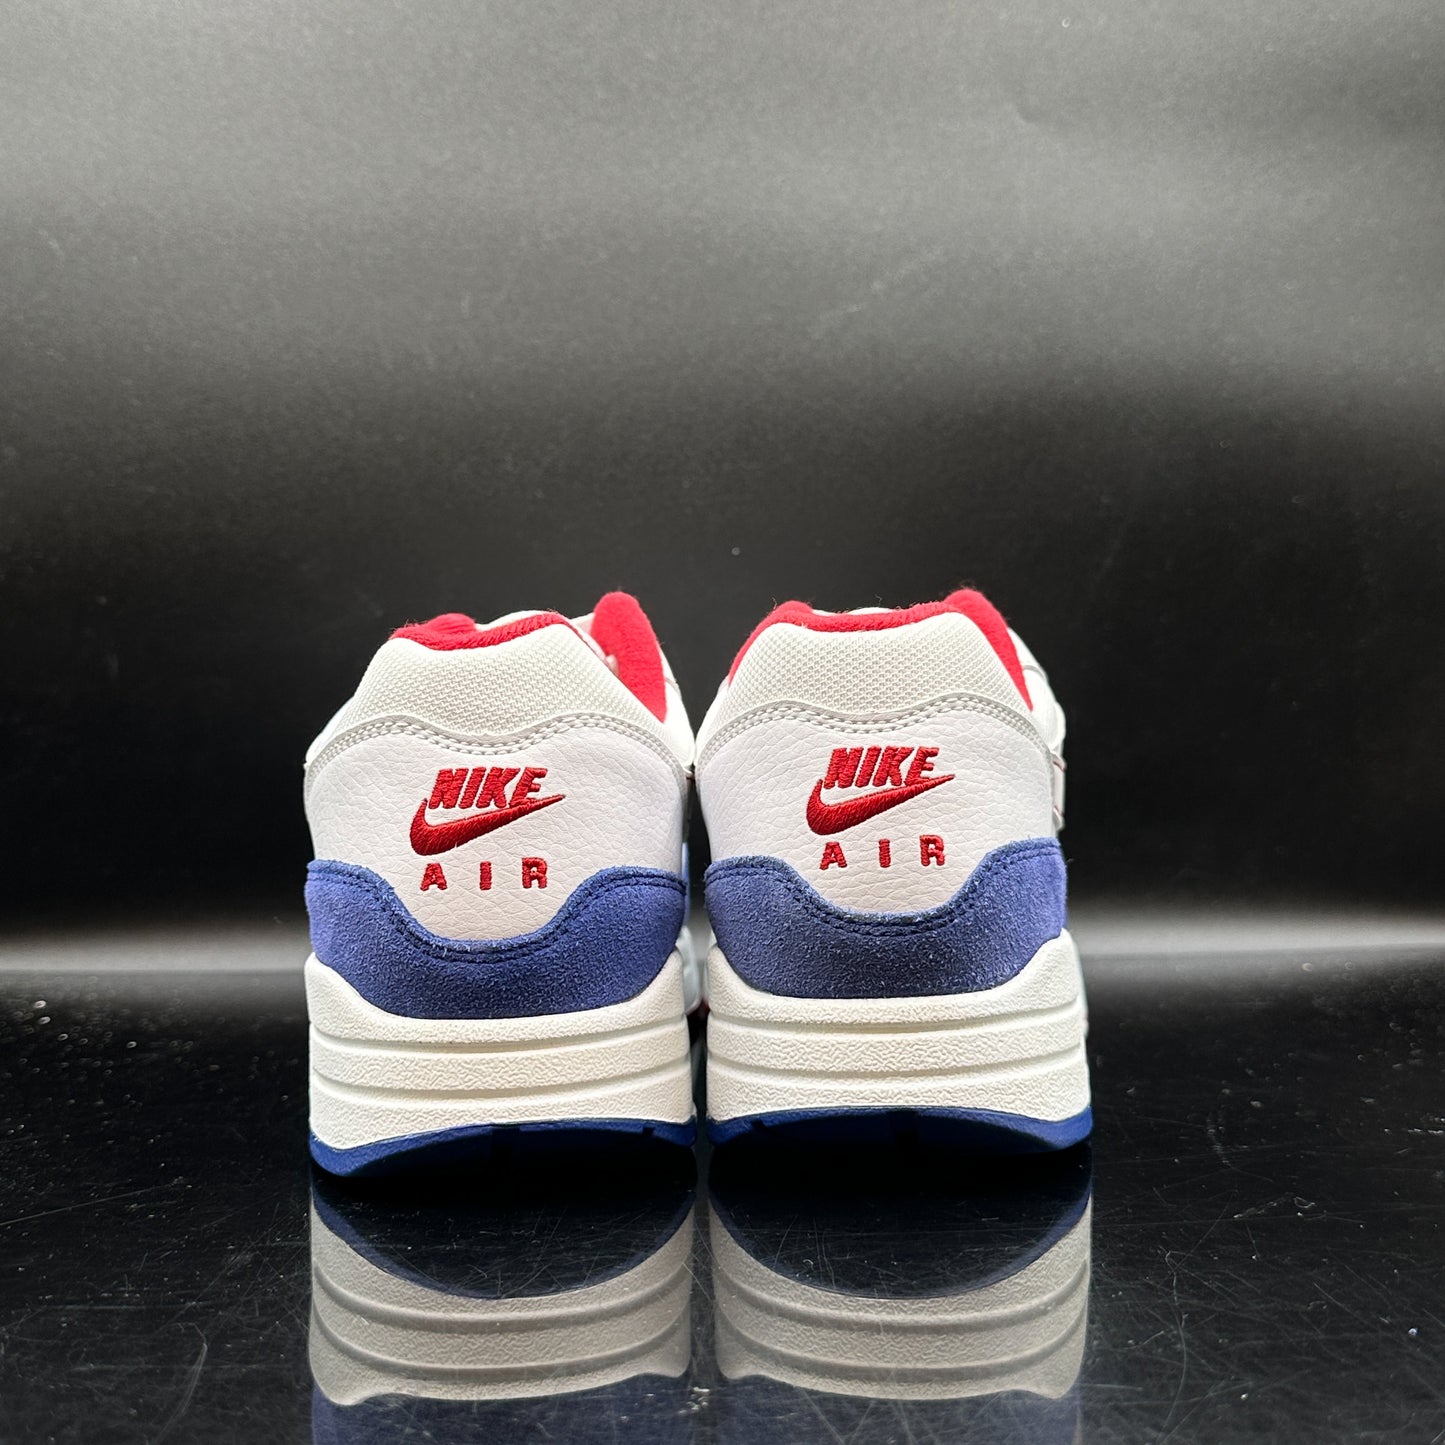 *PRE-OWNED Nike Air Max 1 White Red Blue SZ 8